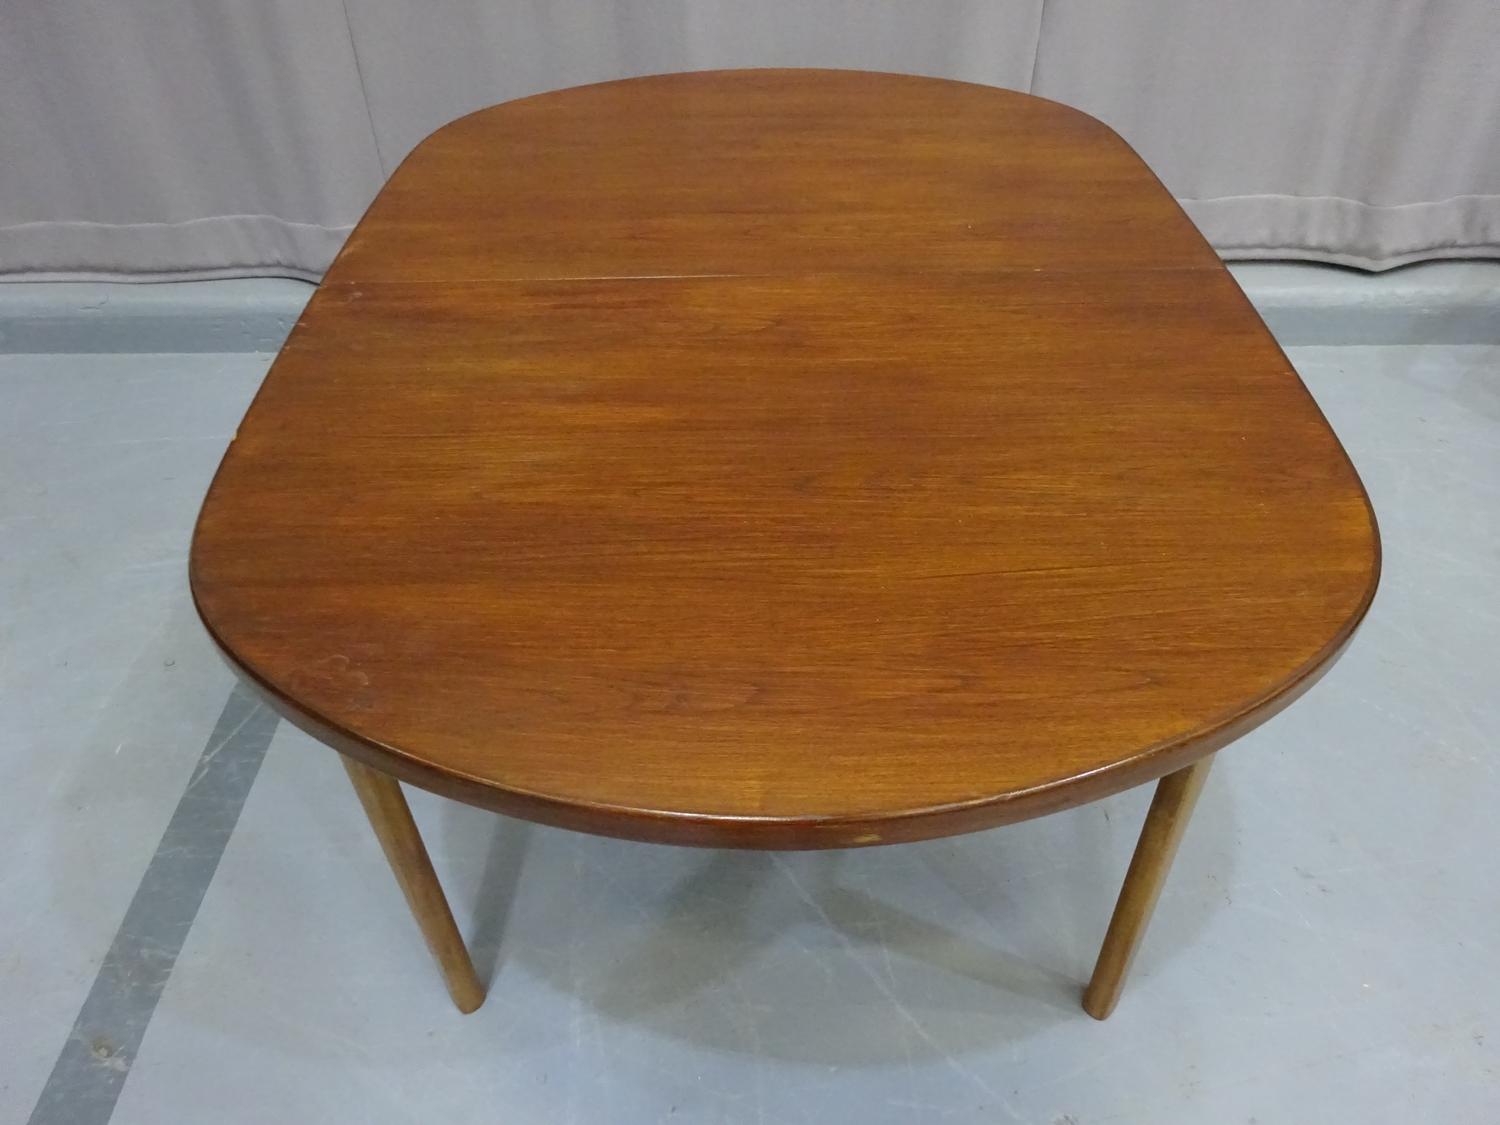 Dark oval table - Image 6 of 6